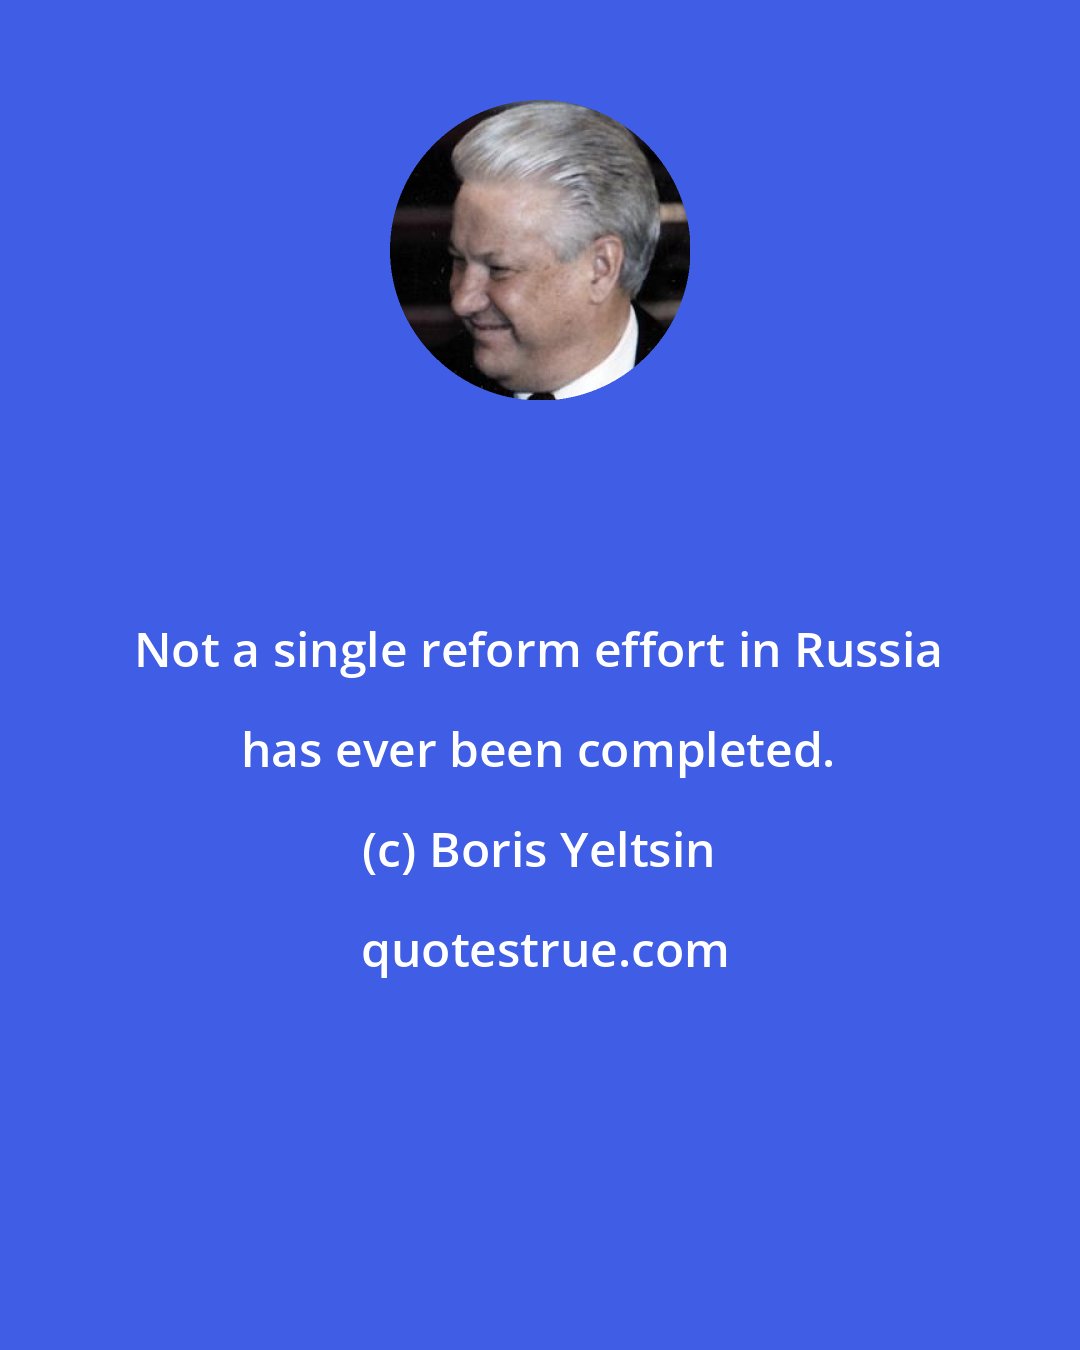 Boris Yeltsin: Not a single reform effort in Russia has ever been completed.